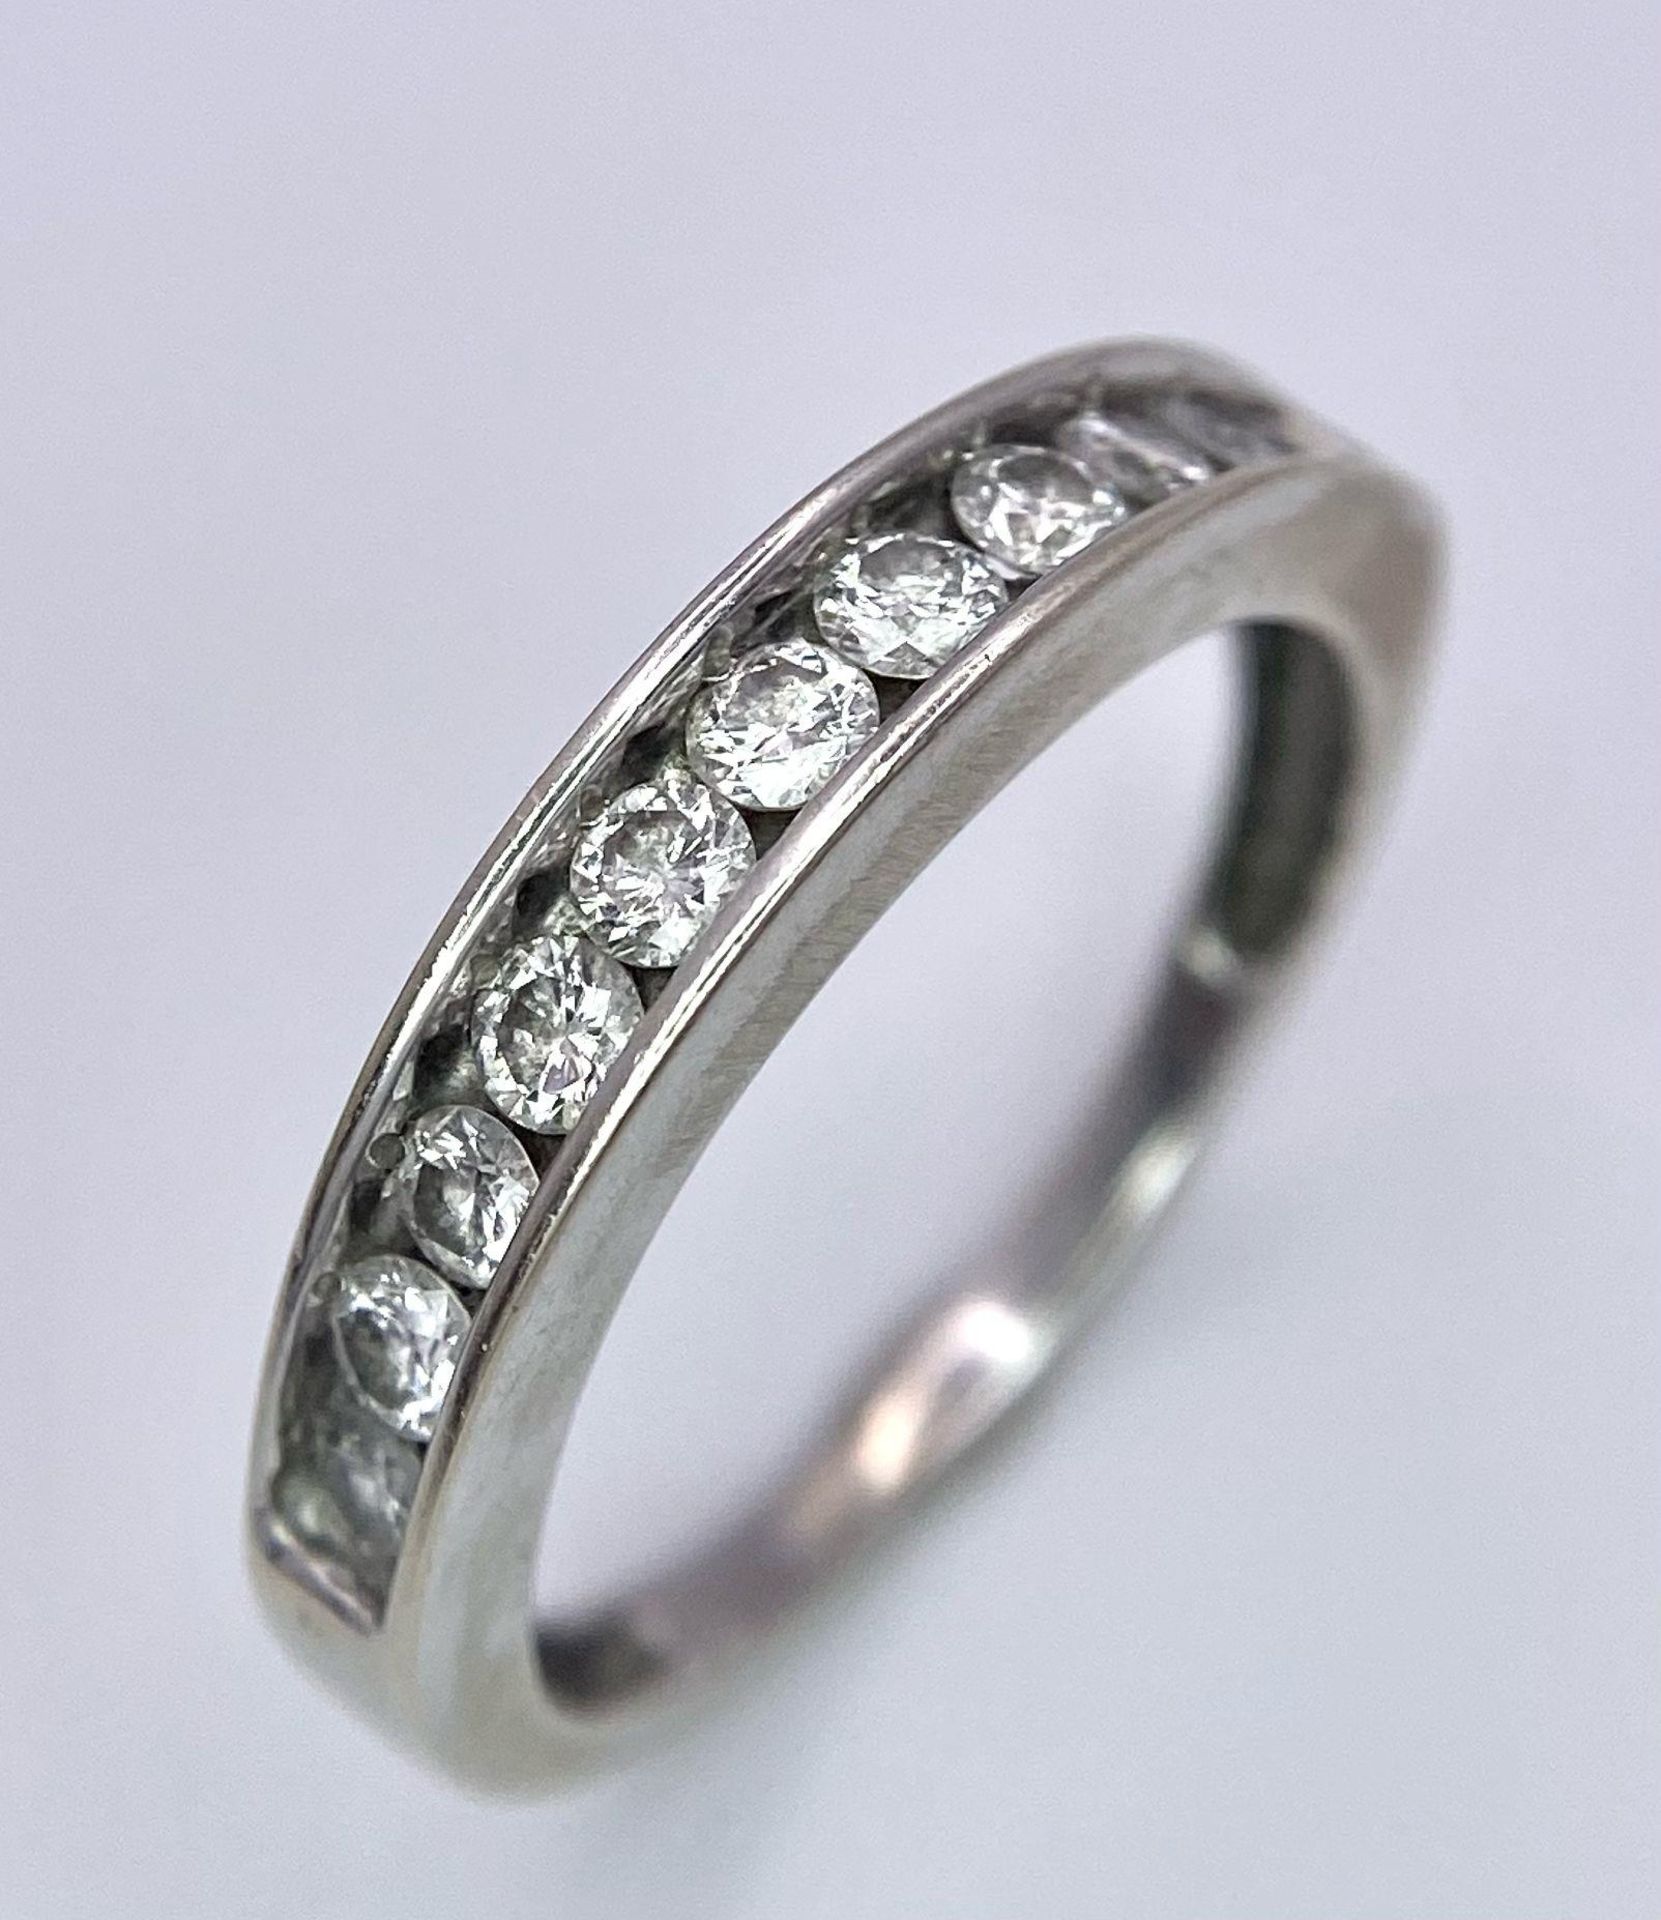 A 14K White Gold, Diamond Half-Eternity Ring. Size N. 2.55g total weight. Ref: 10437